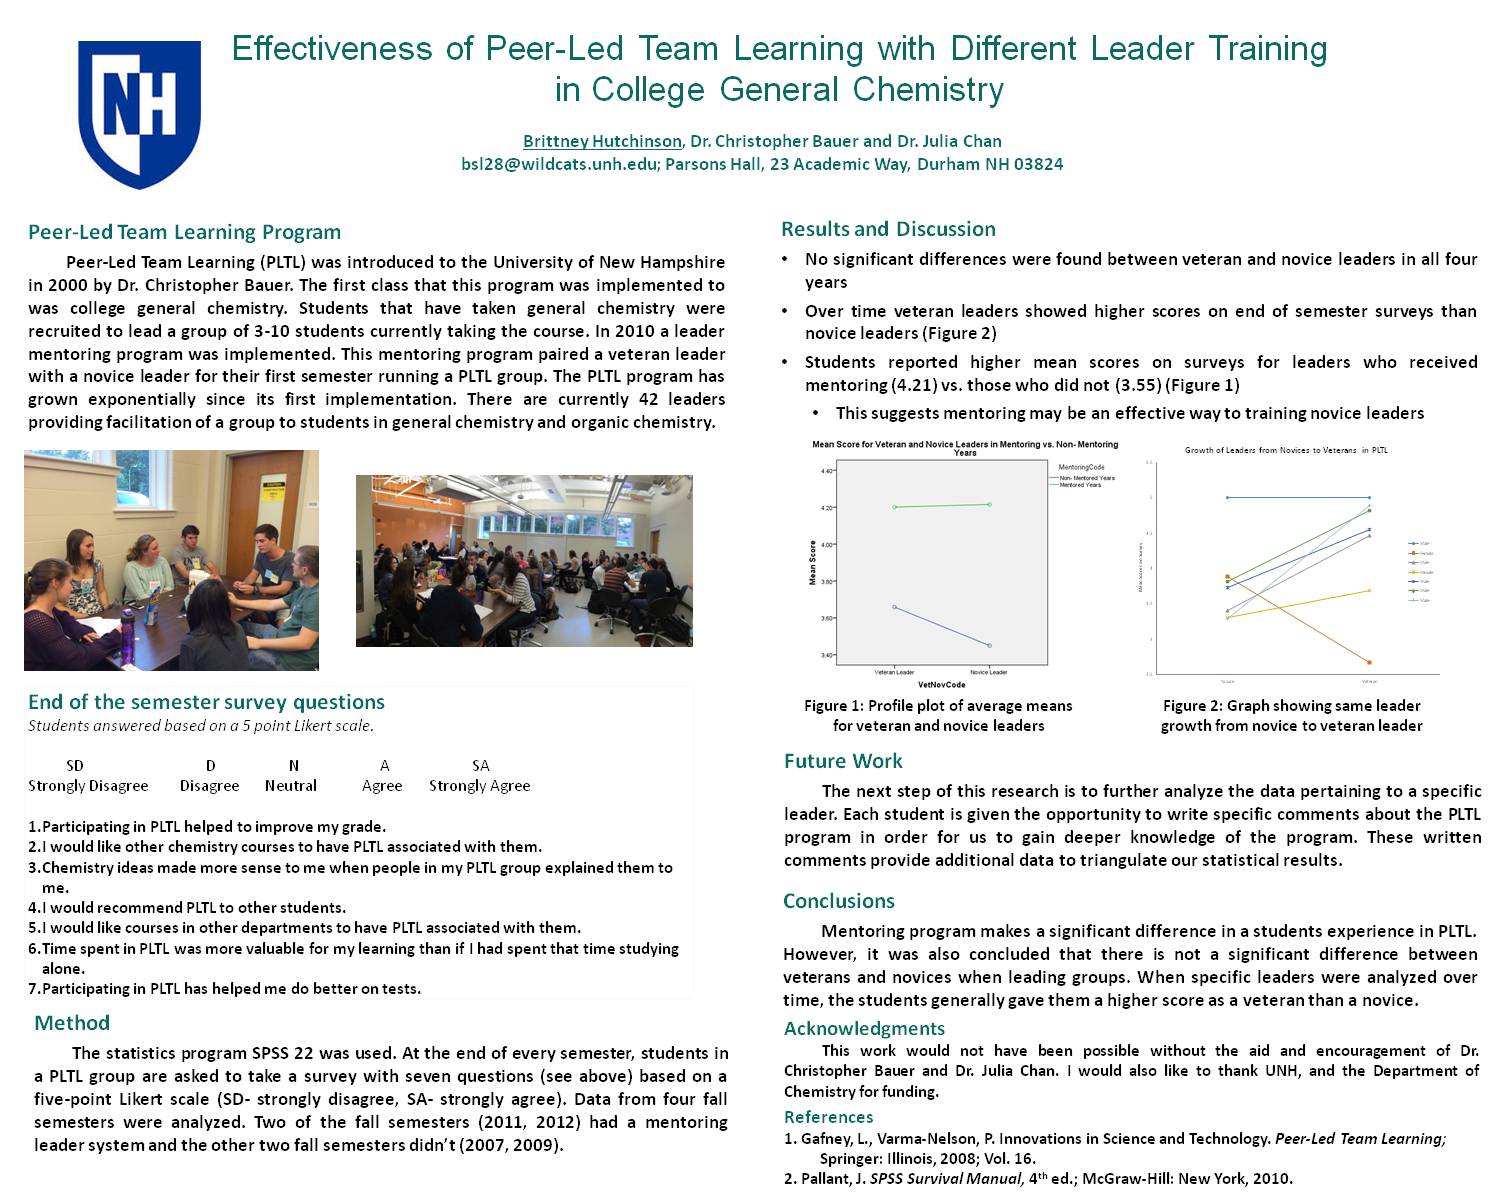 Effectiveness Of Peer-Led Team Learning In College General Chemistry by brittney1718